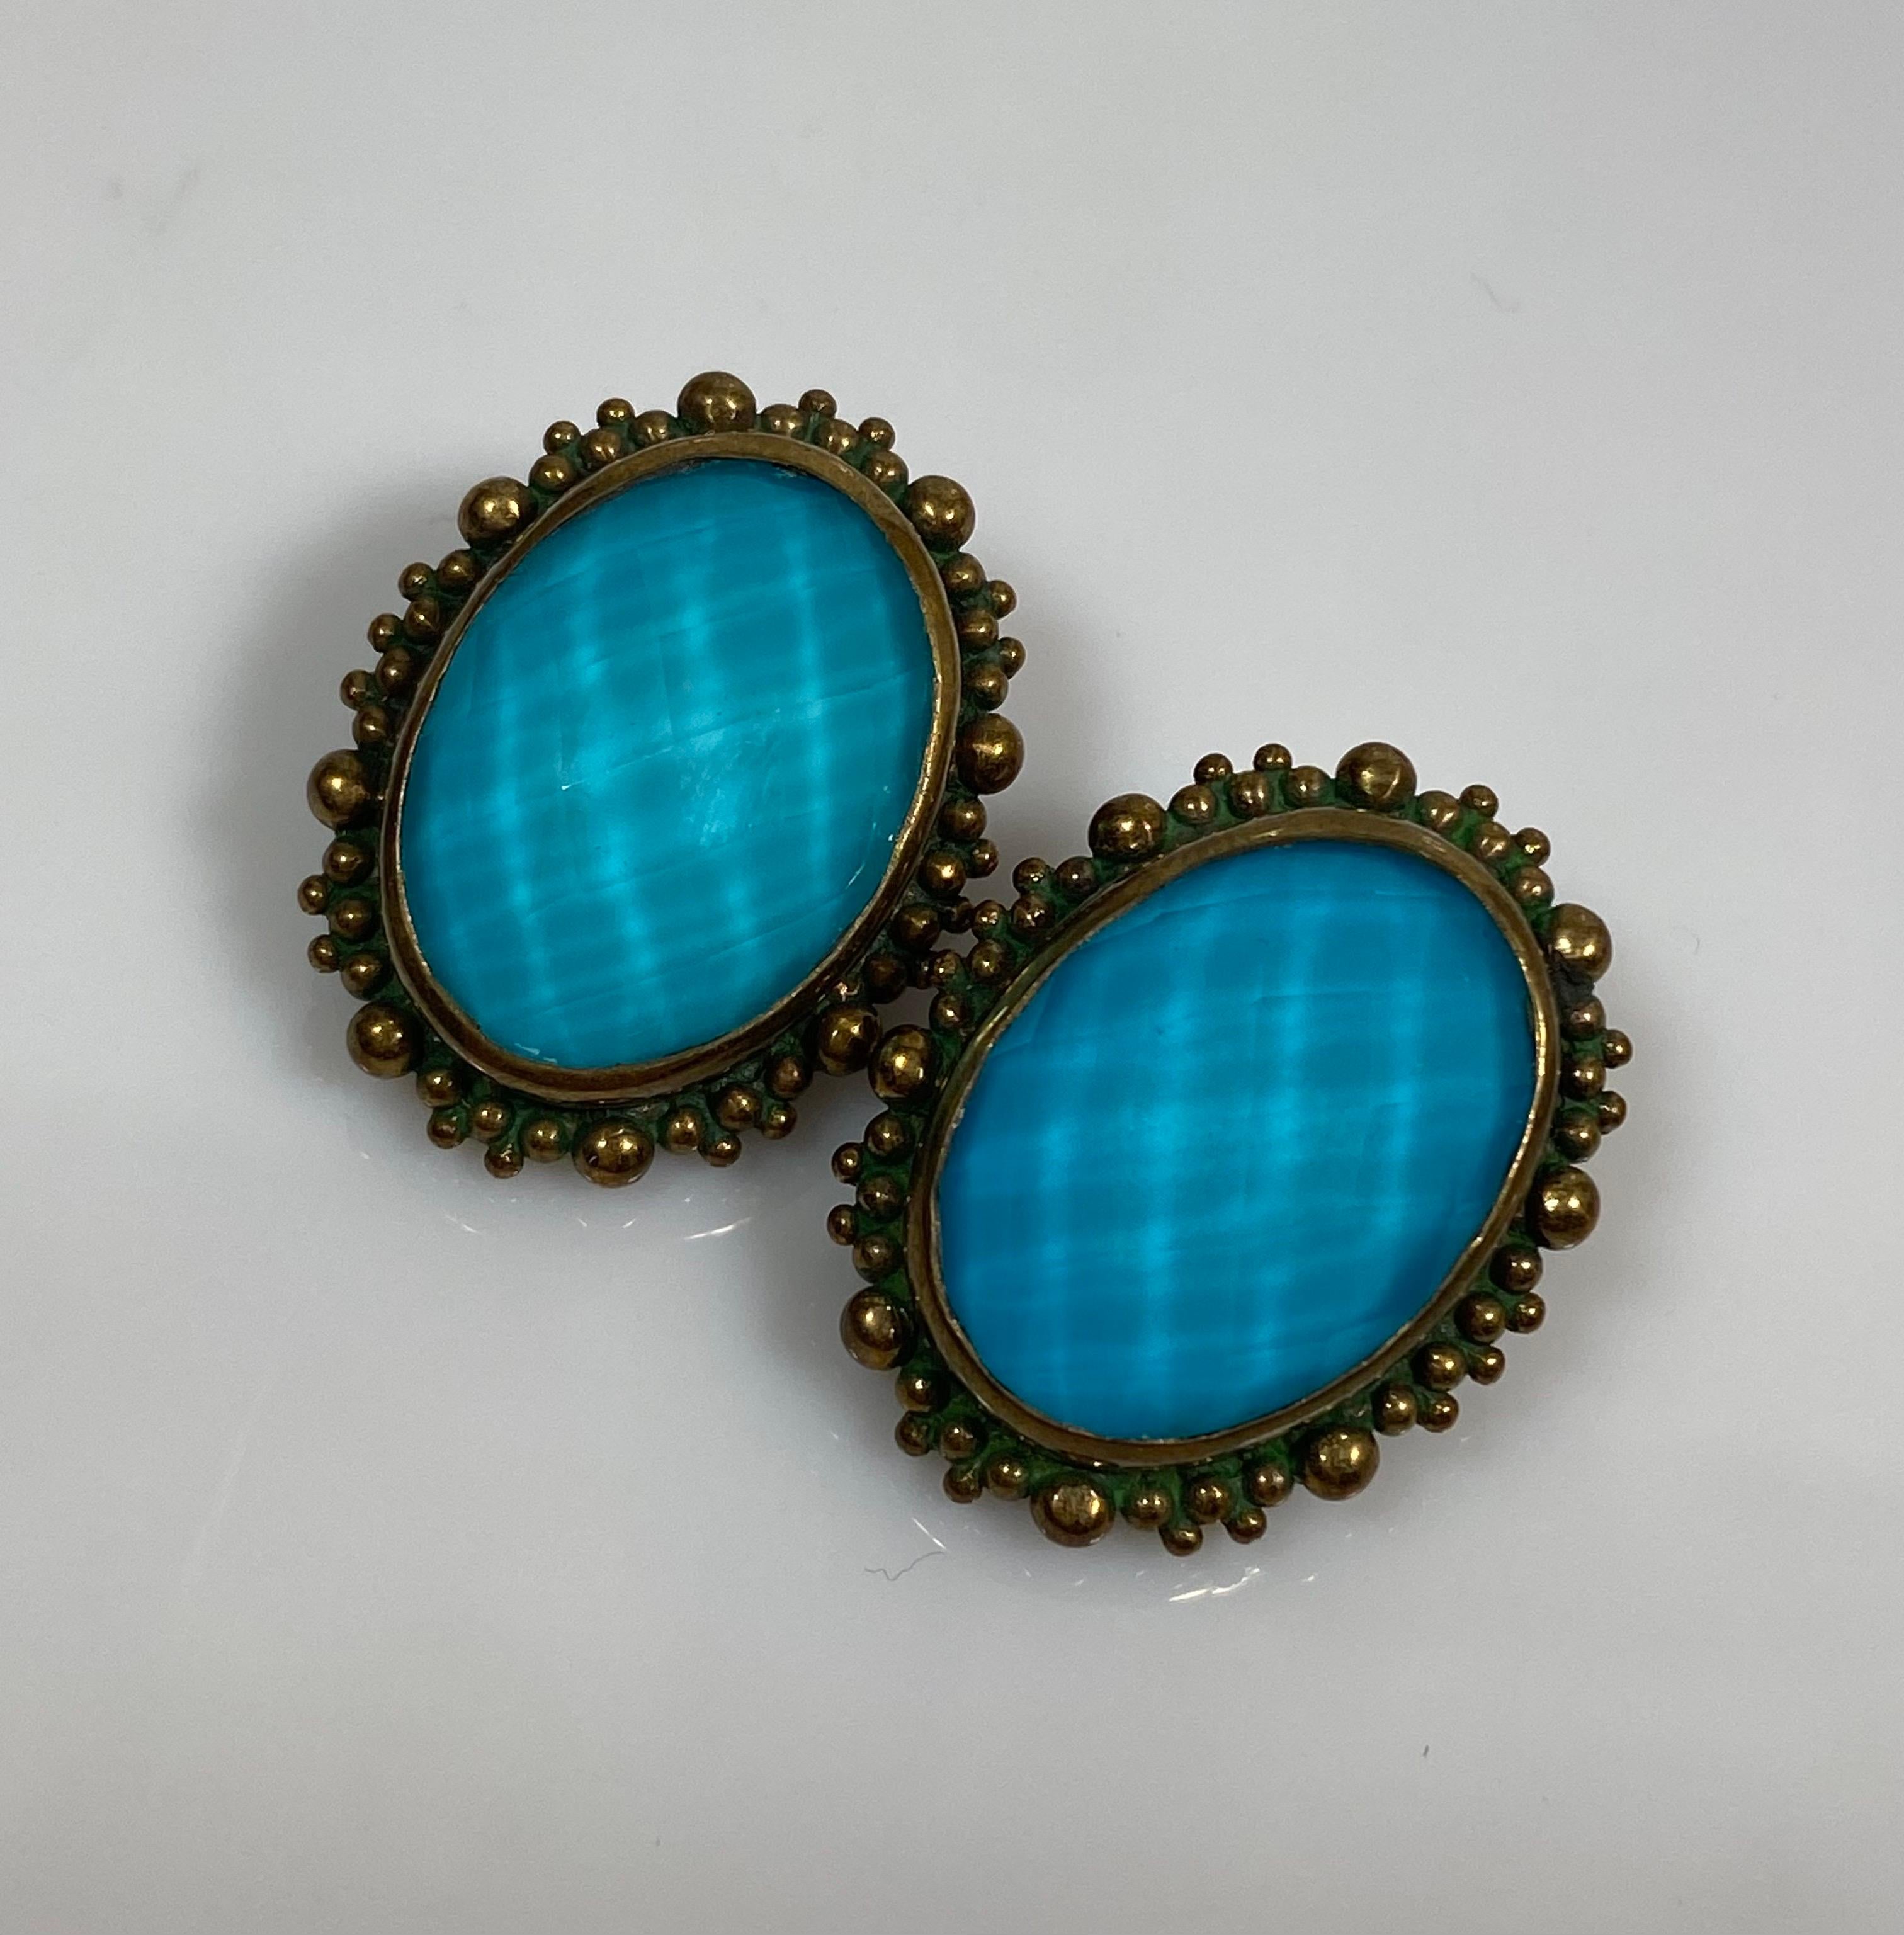 These 2001 Stephen Dweck earrings are sterling silver with a bronze overlay and a faceted turquoise textured oval shape. Around the main faceted stone is a bronze textured trim and there is a textured back and bronze clip. These vintage earrings are